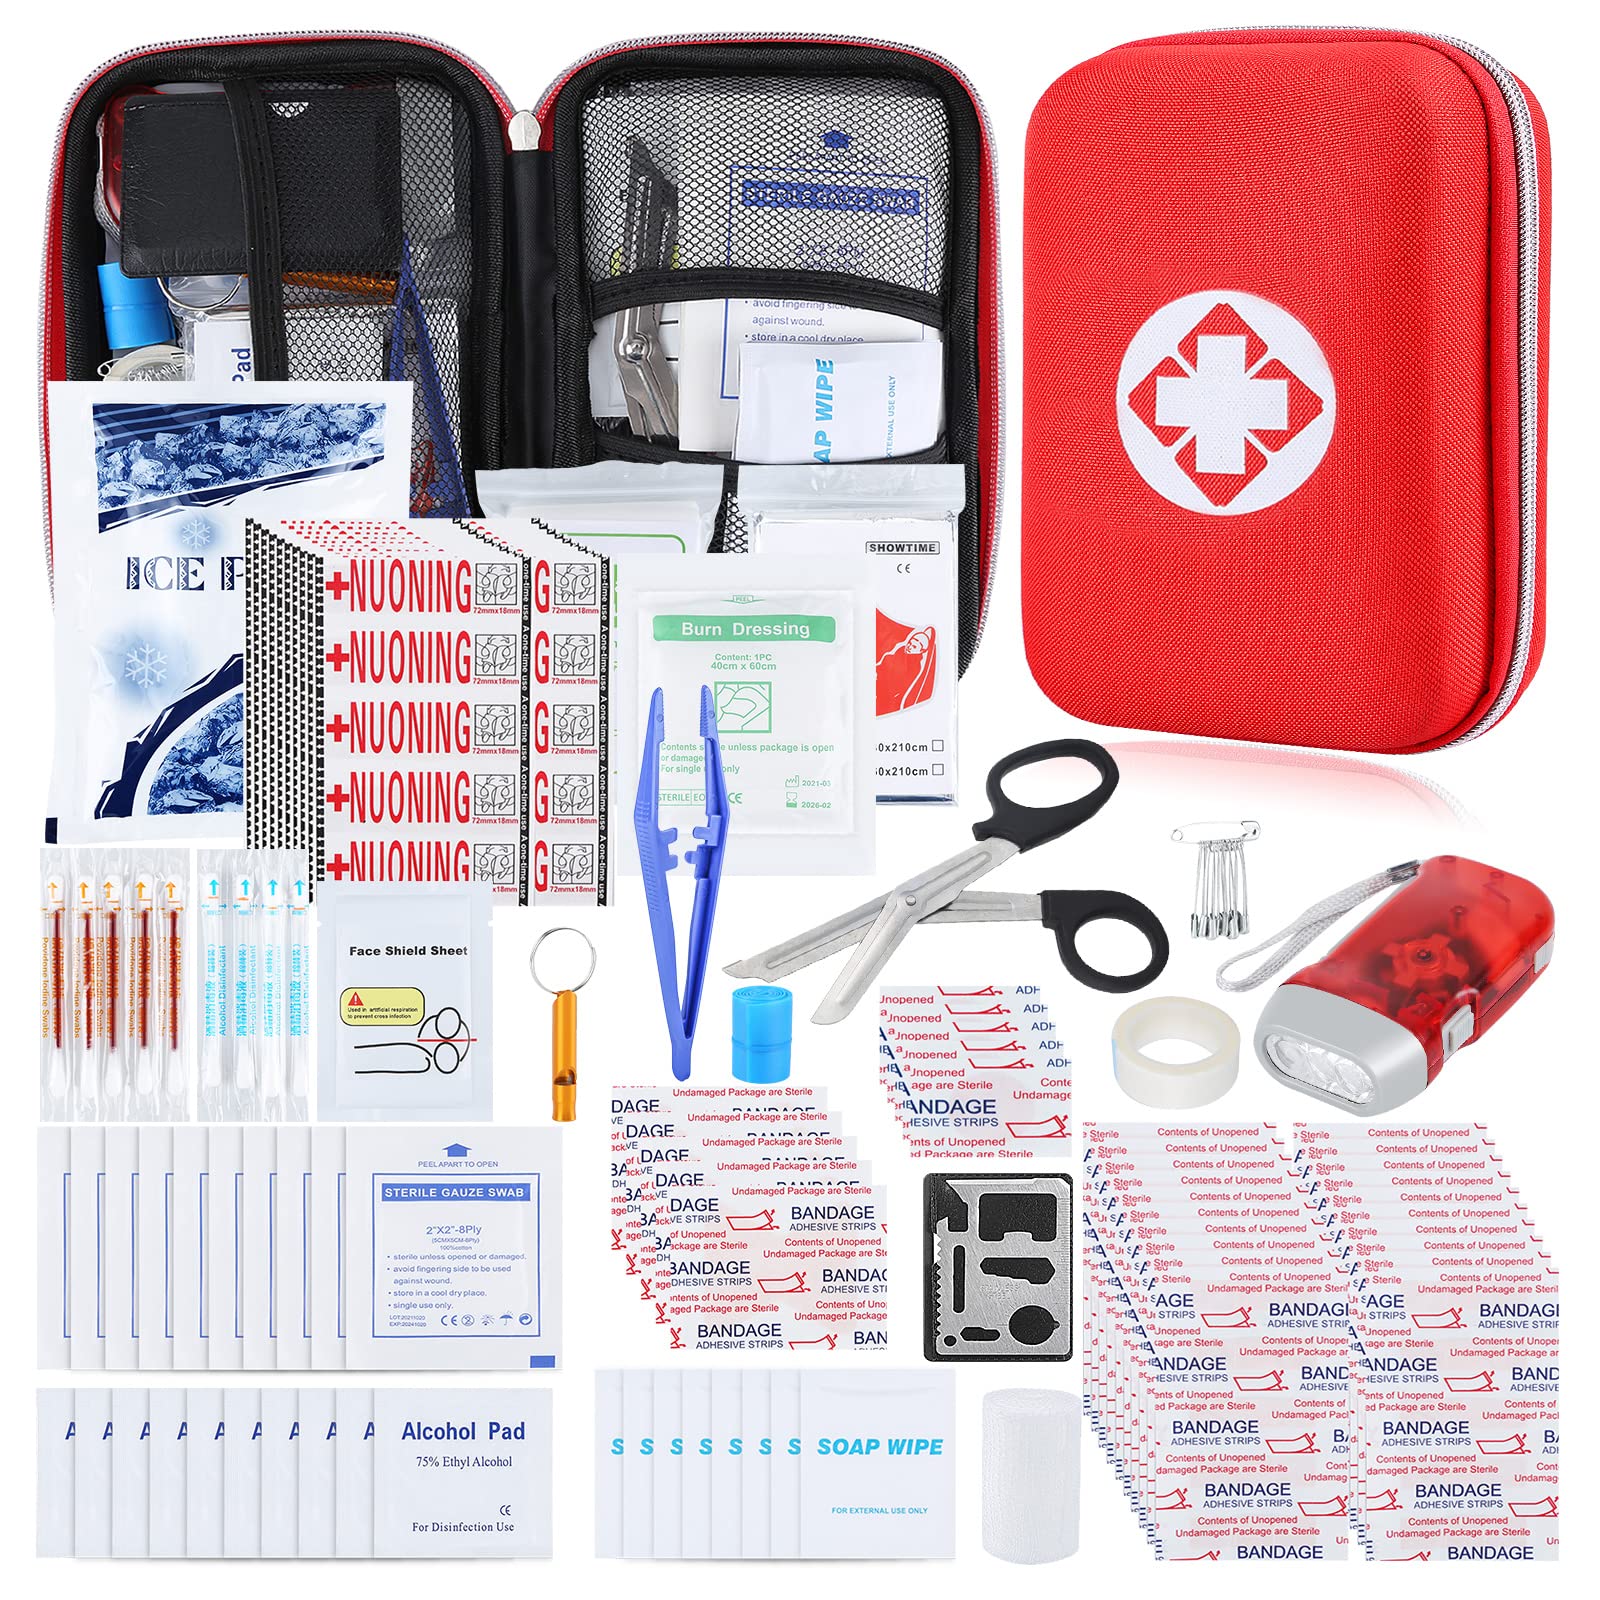 YIDERBO First Aid Kit Survival Kit, 274Pcs Upgraded Outdoor Emergency Survival Kit gear - Medical Supplies Trauma Bag Safety Fir